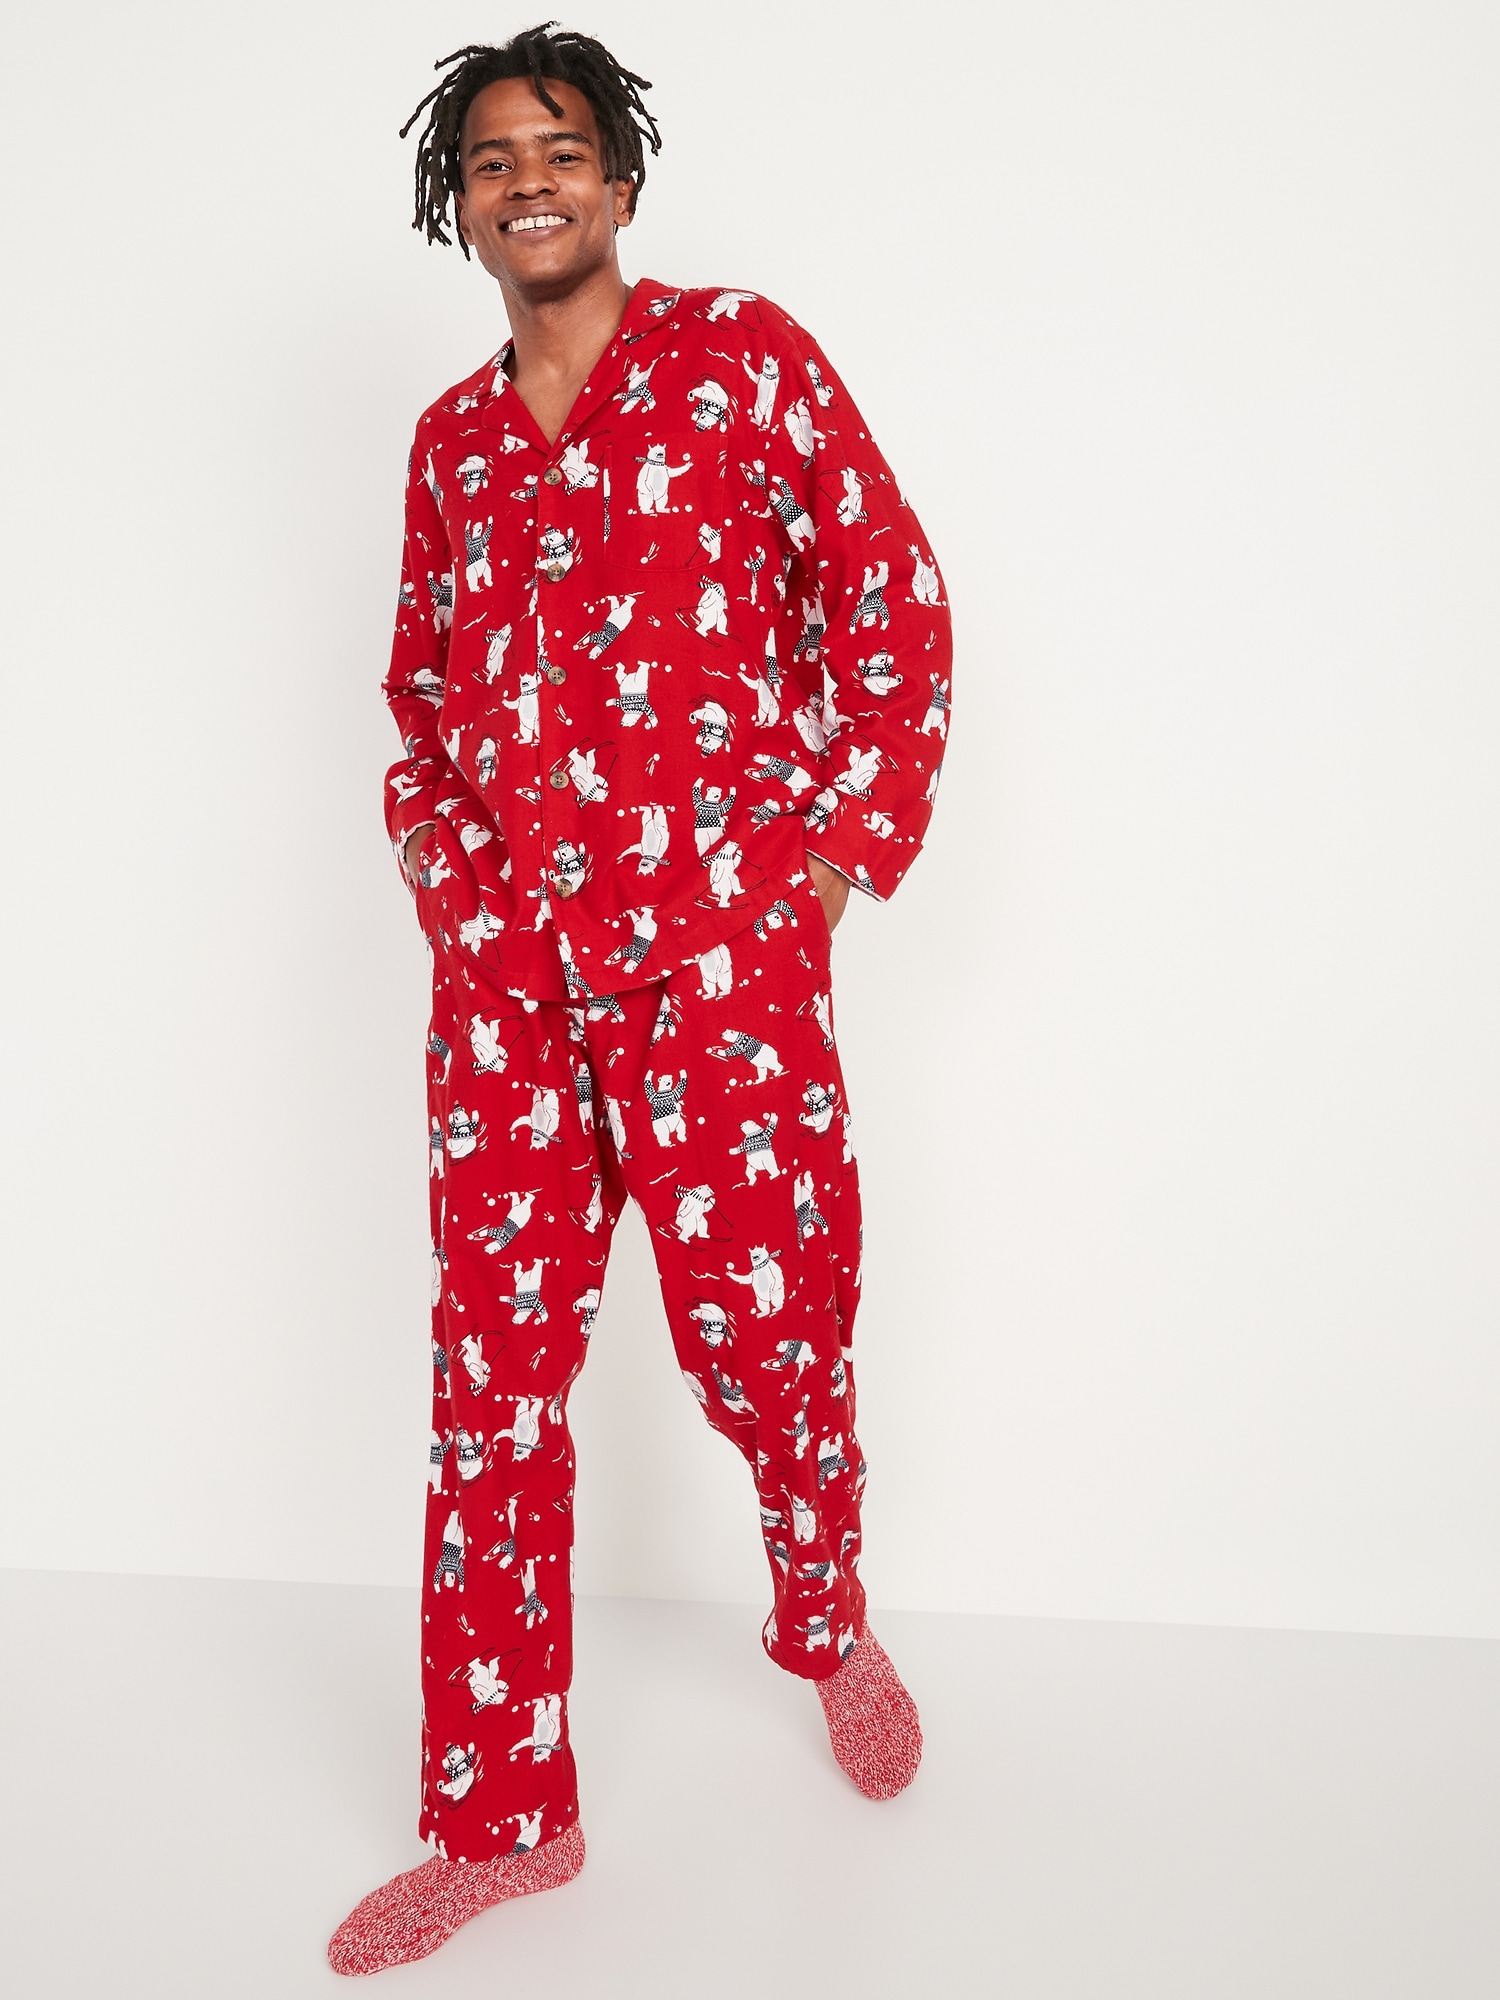 Matching Holiday Flannel Pajamas Set for Men